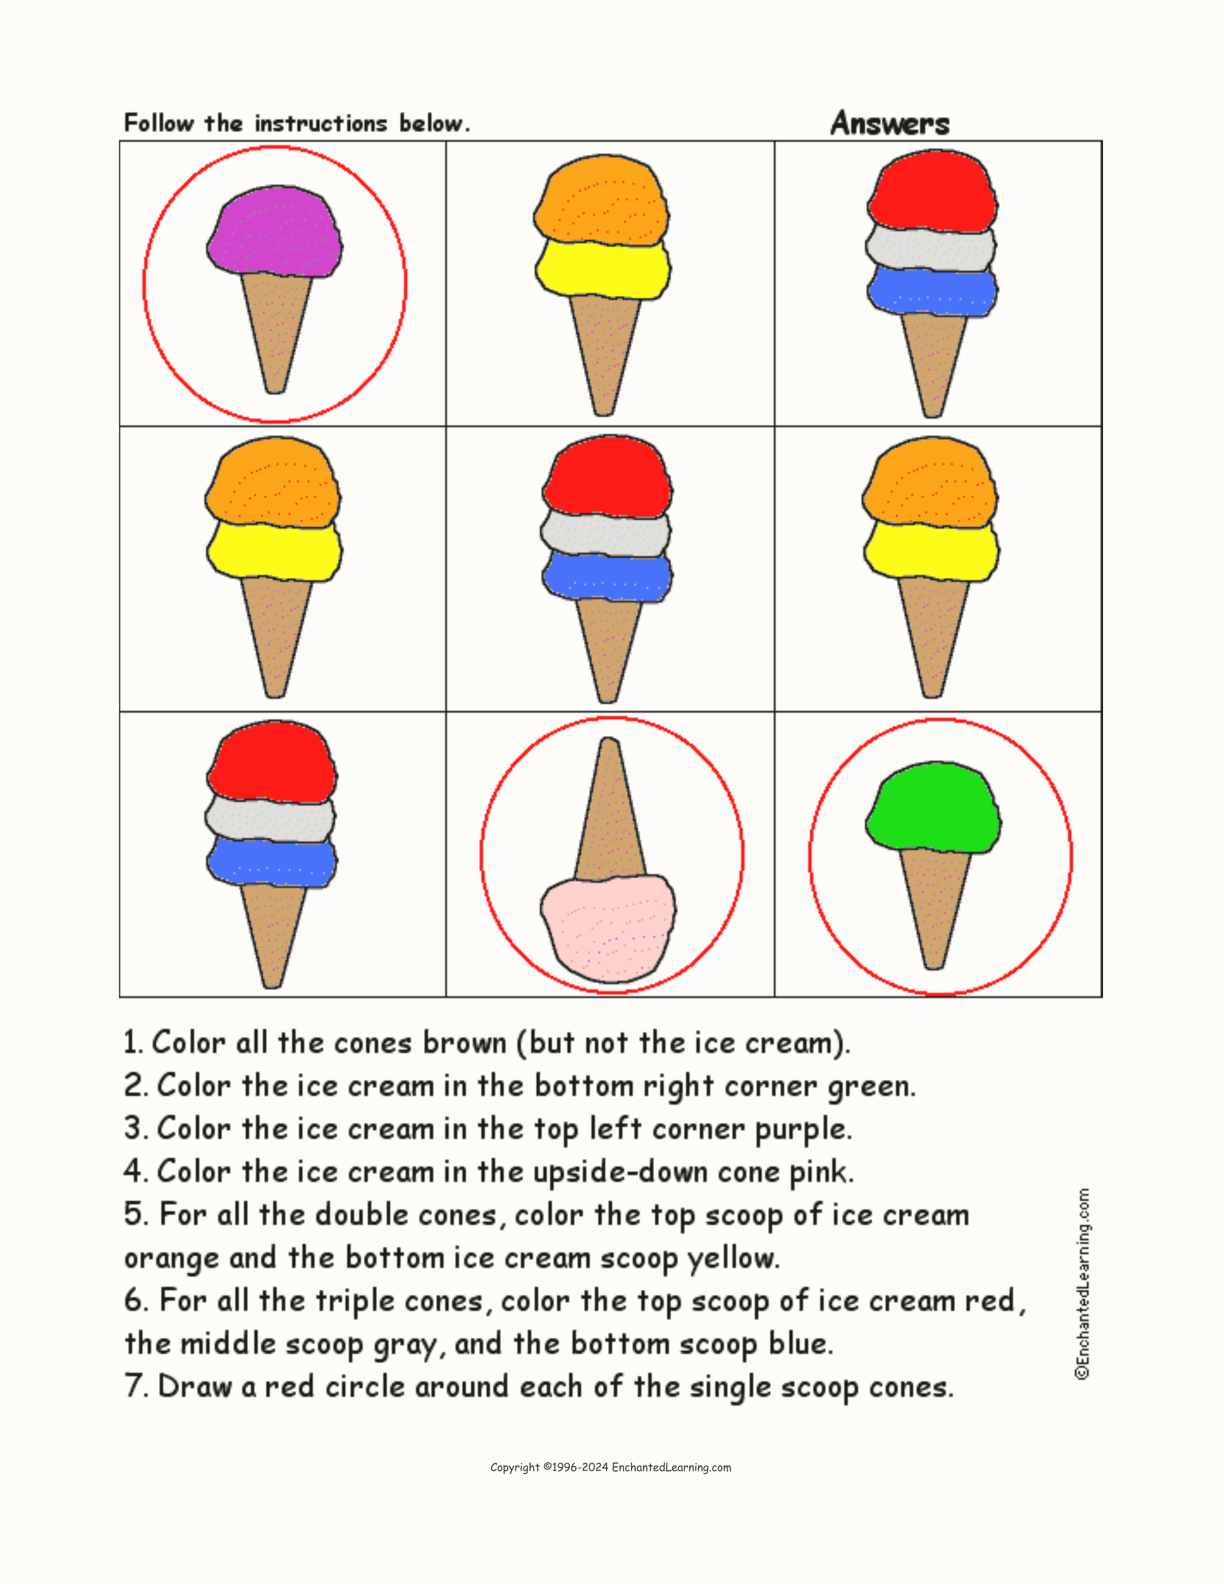 Ice Cream Cones: Follow the Instructions interactive worksheet page 2